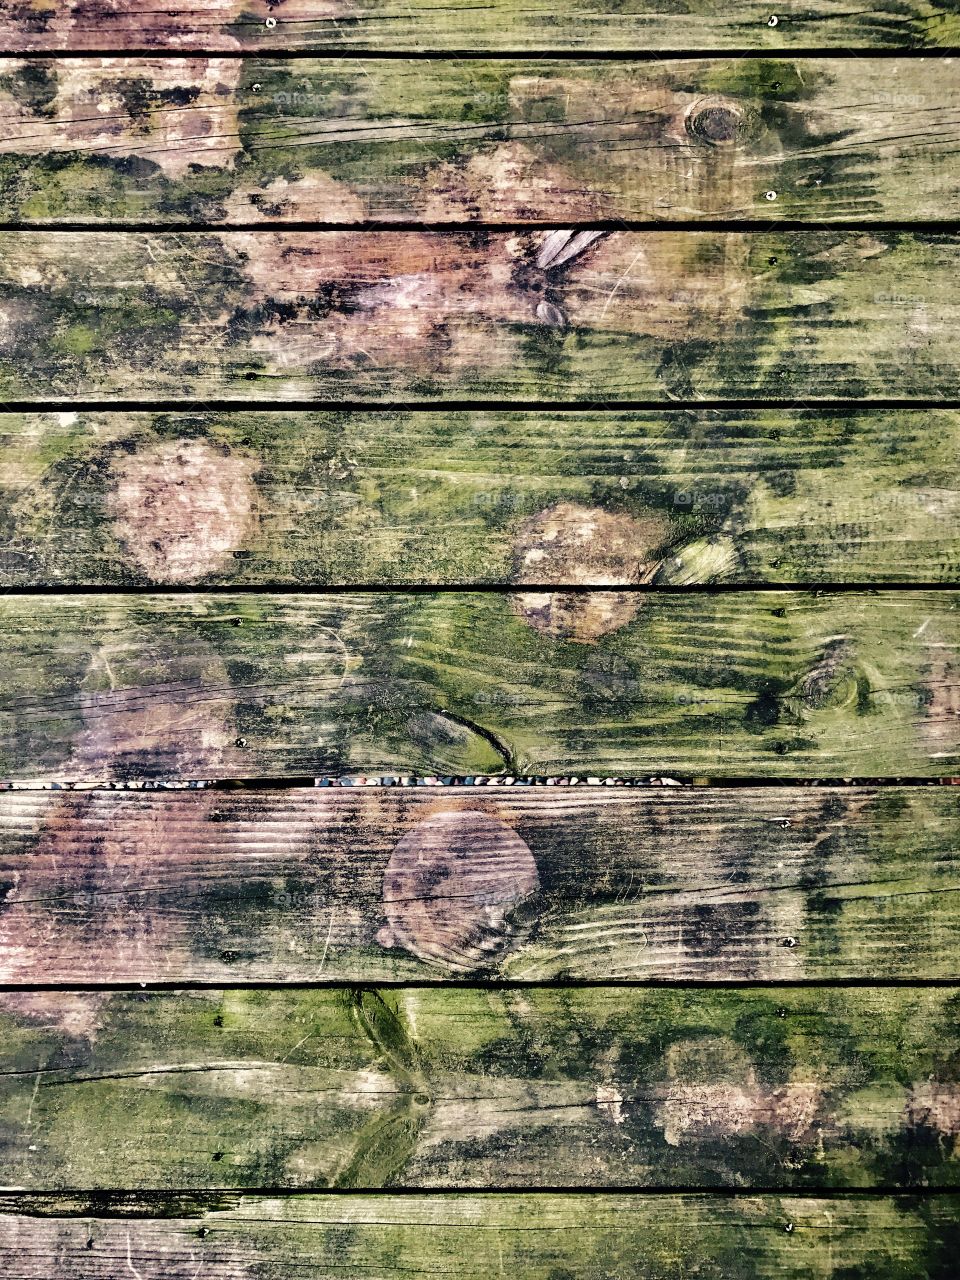 Wooden board - natural pattern